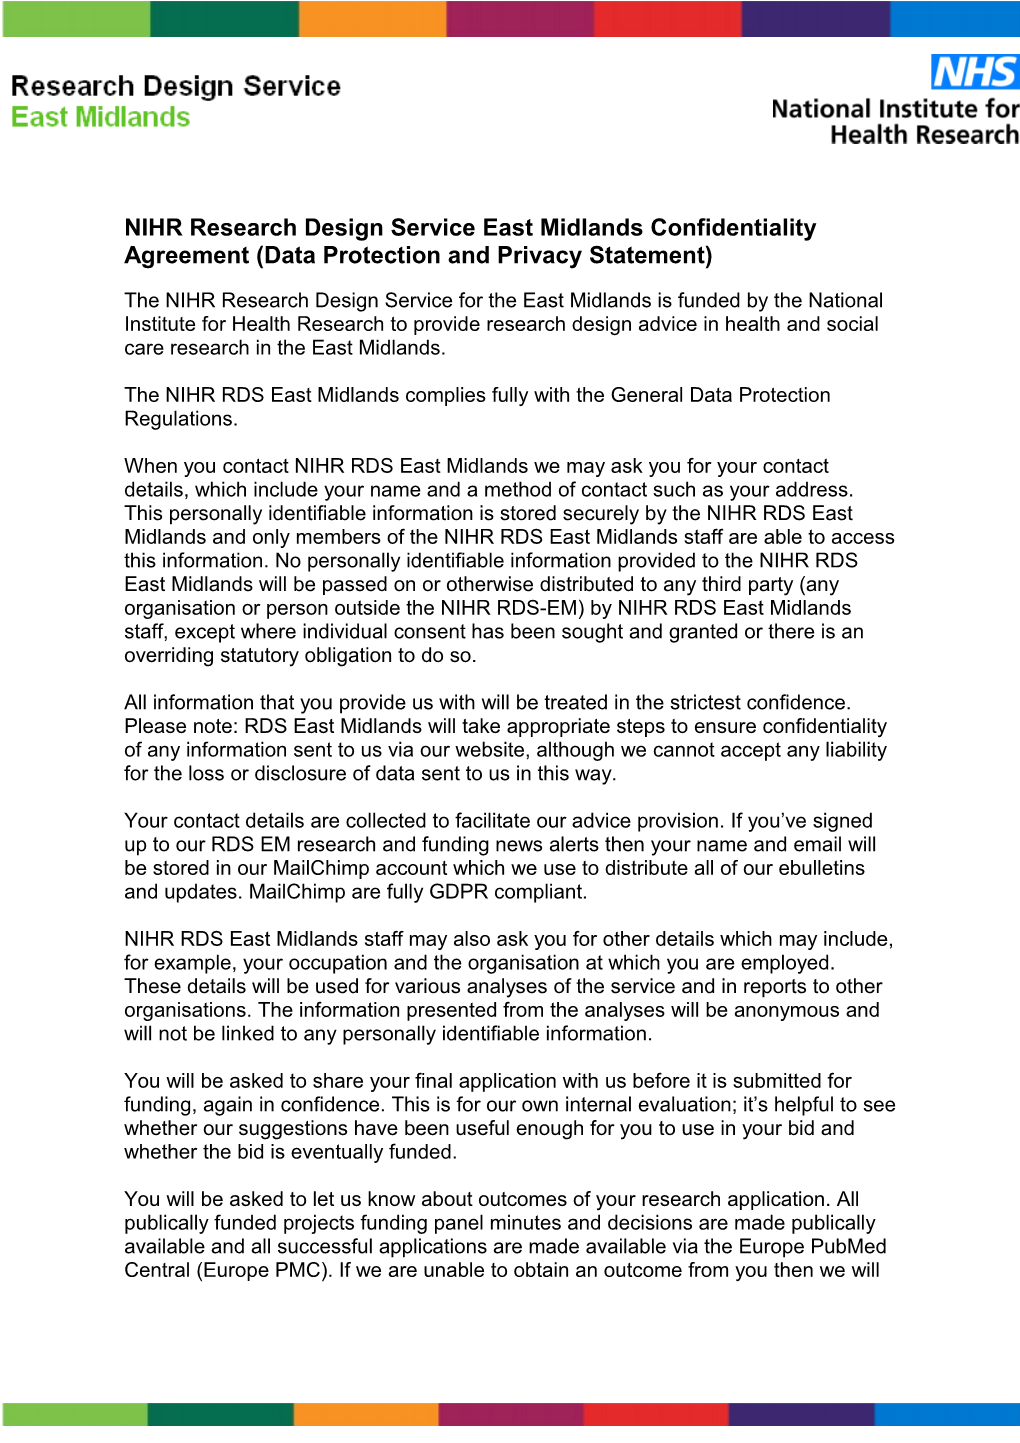 NIHR Research Design Service East Midlands Confidentiality Agreement (Data Protection